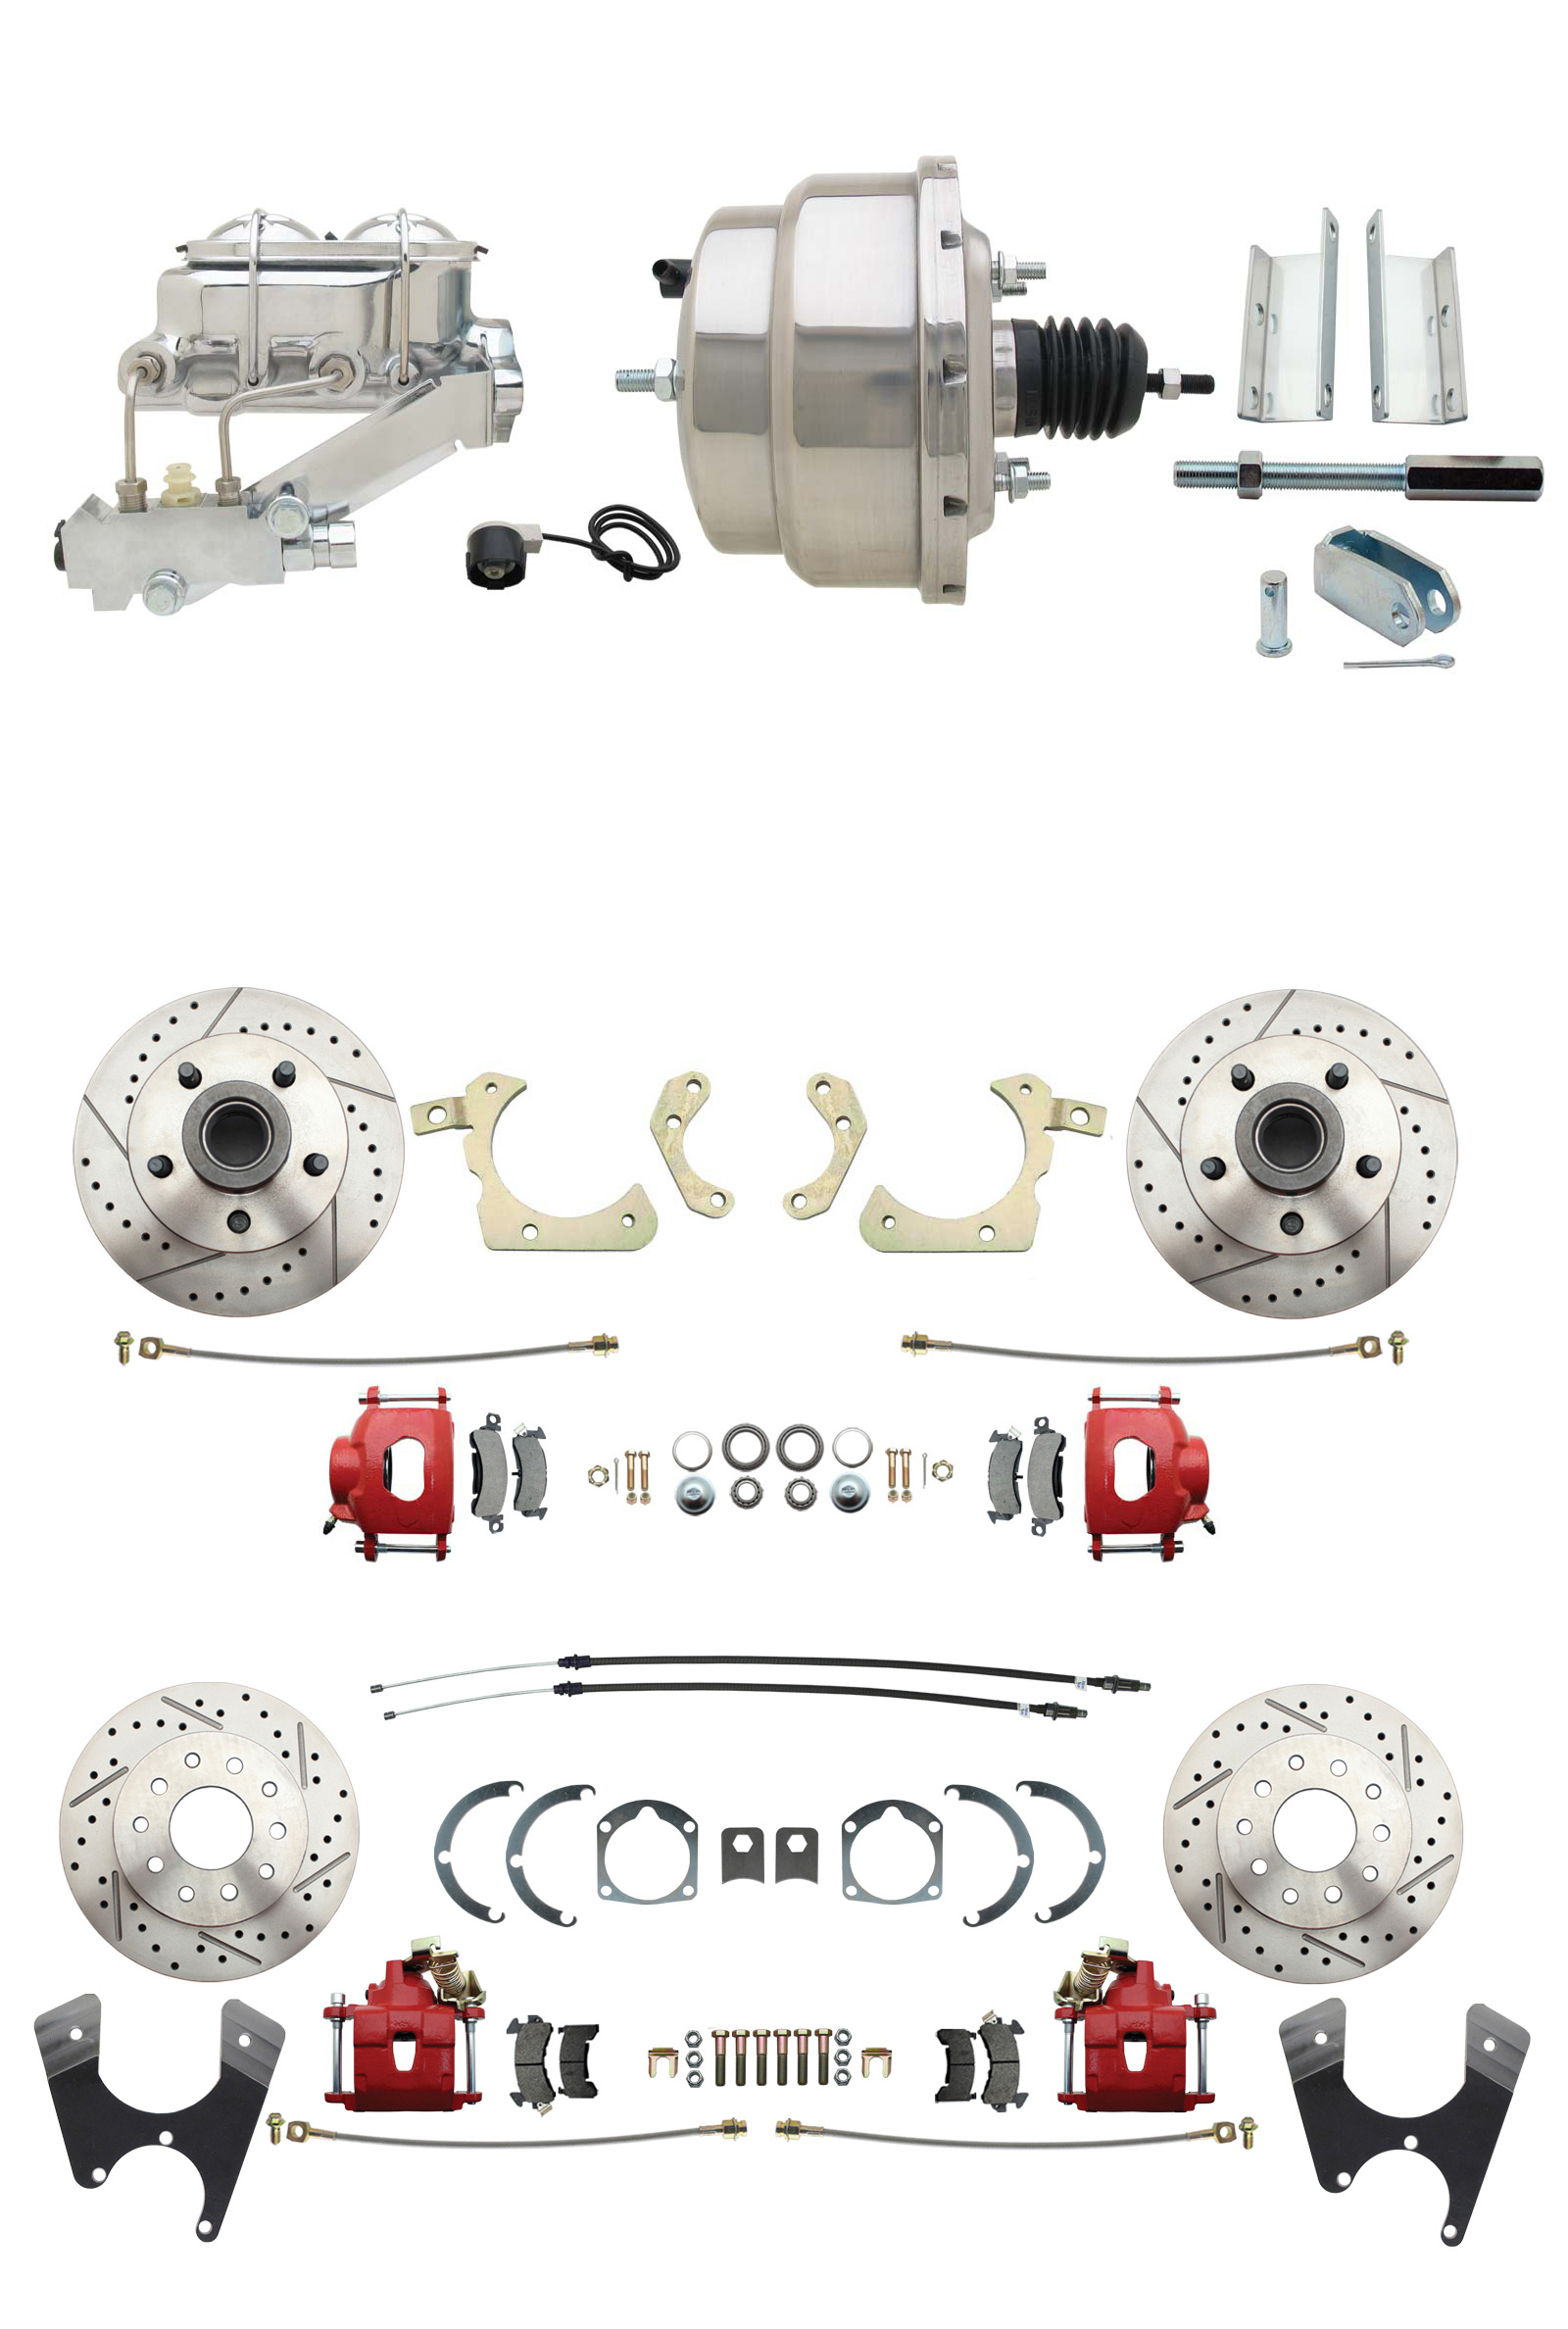 1955-1958 GM Full Size Front & Rear Power Disc Brake Kit Red Powder Coated Calipers Drilled/Slotted Rotors (Impala, Bel Air, Biscayne) & 8 Dual Stainless Steel Booster Conversion Kit W/ Chrome Master Cylinder Left Mount